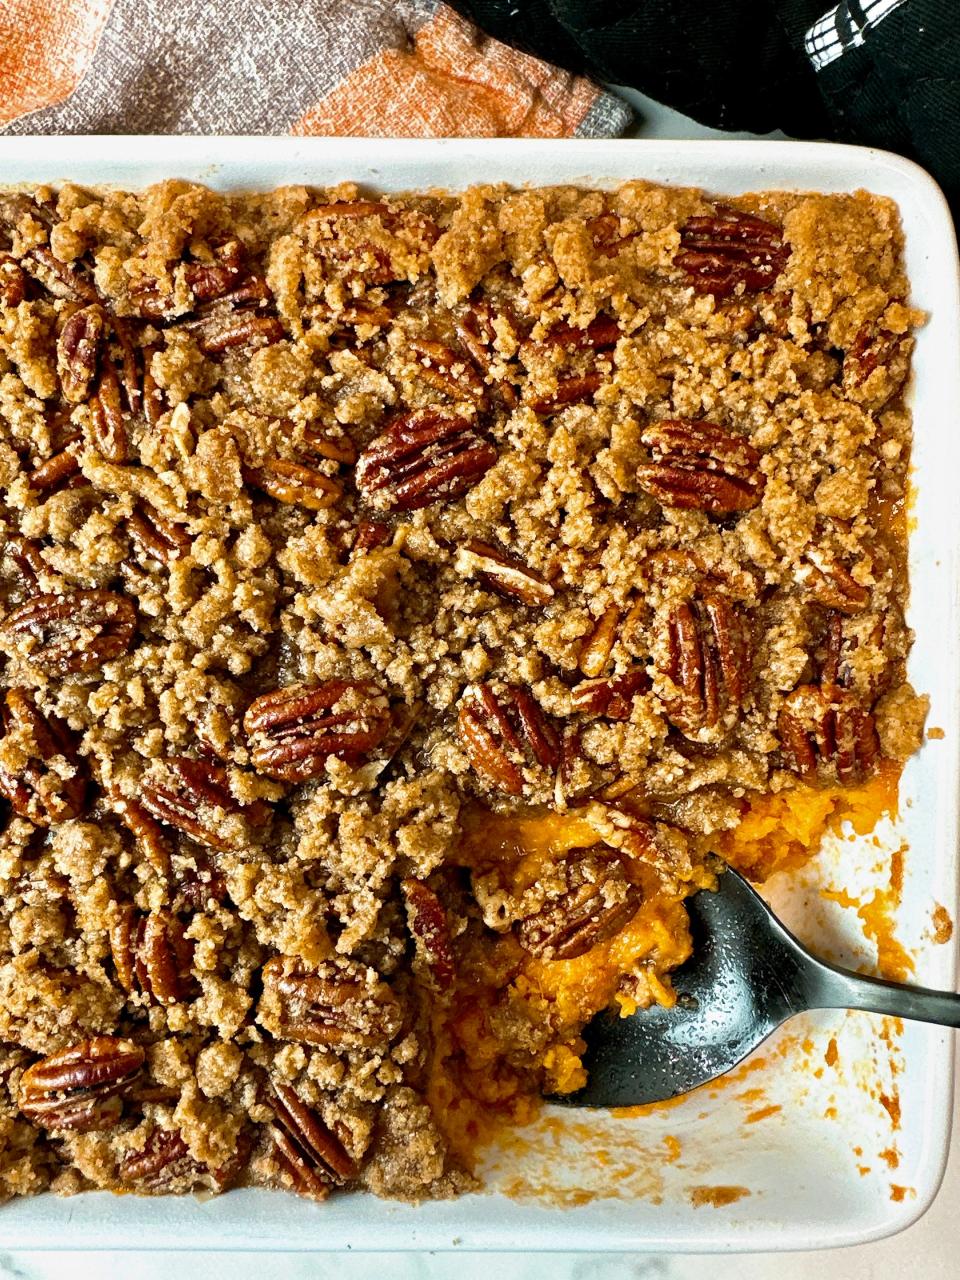 Pecan brittle topped sweet potato casserole is the ultimate holiday side dish.